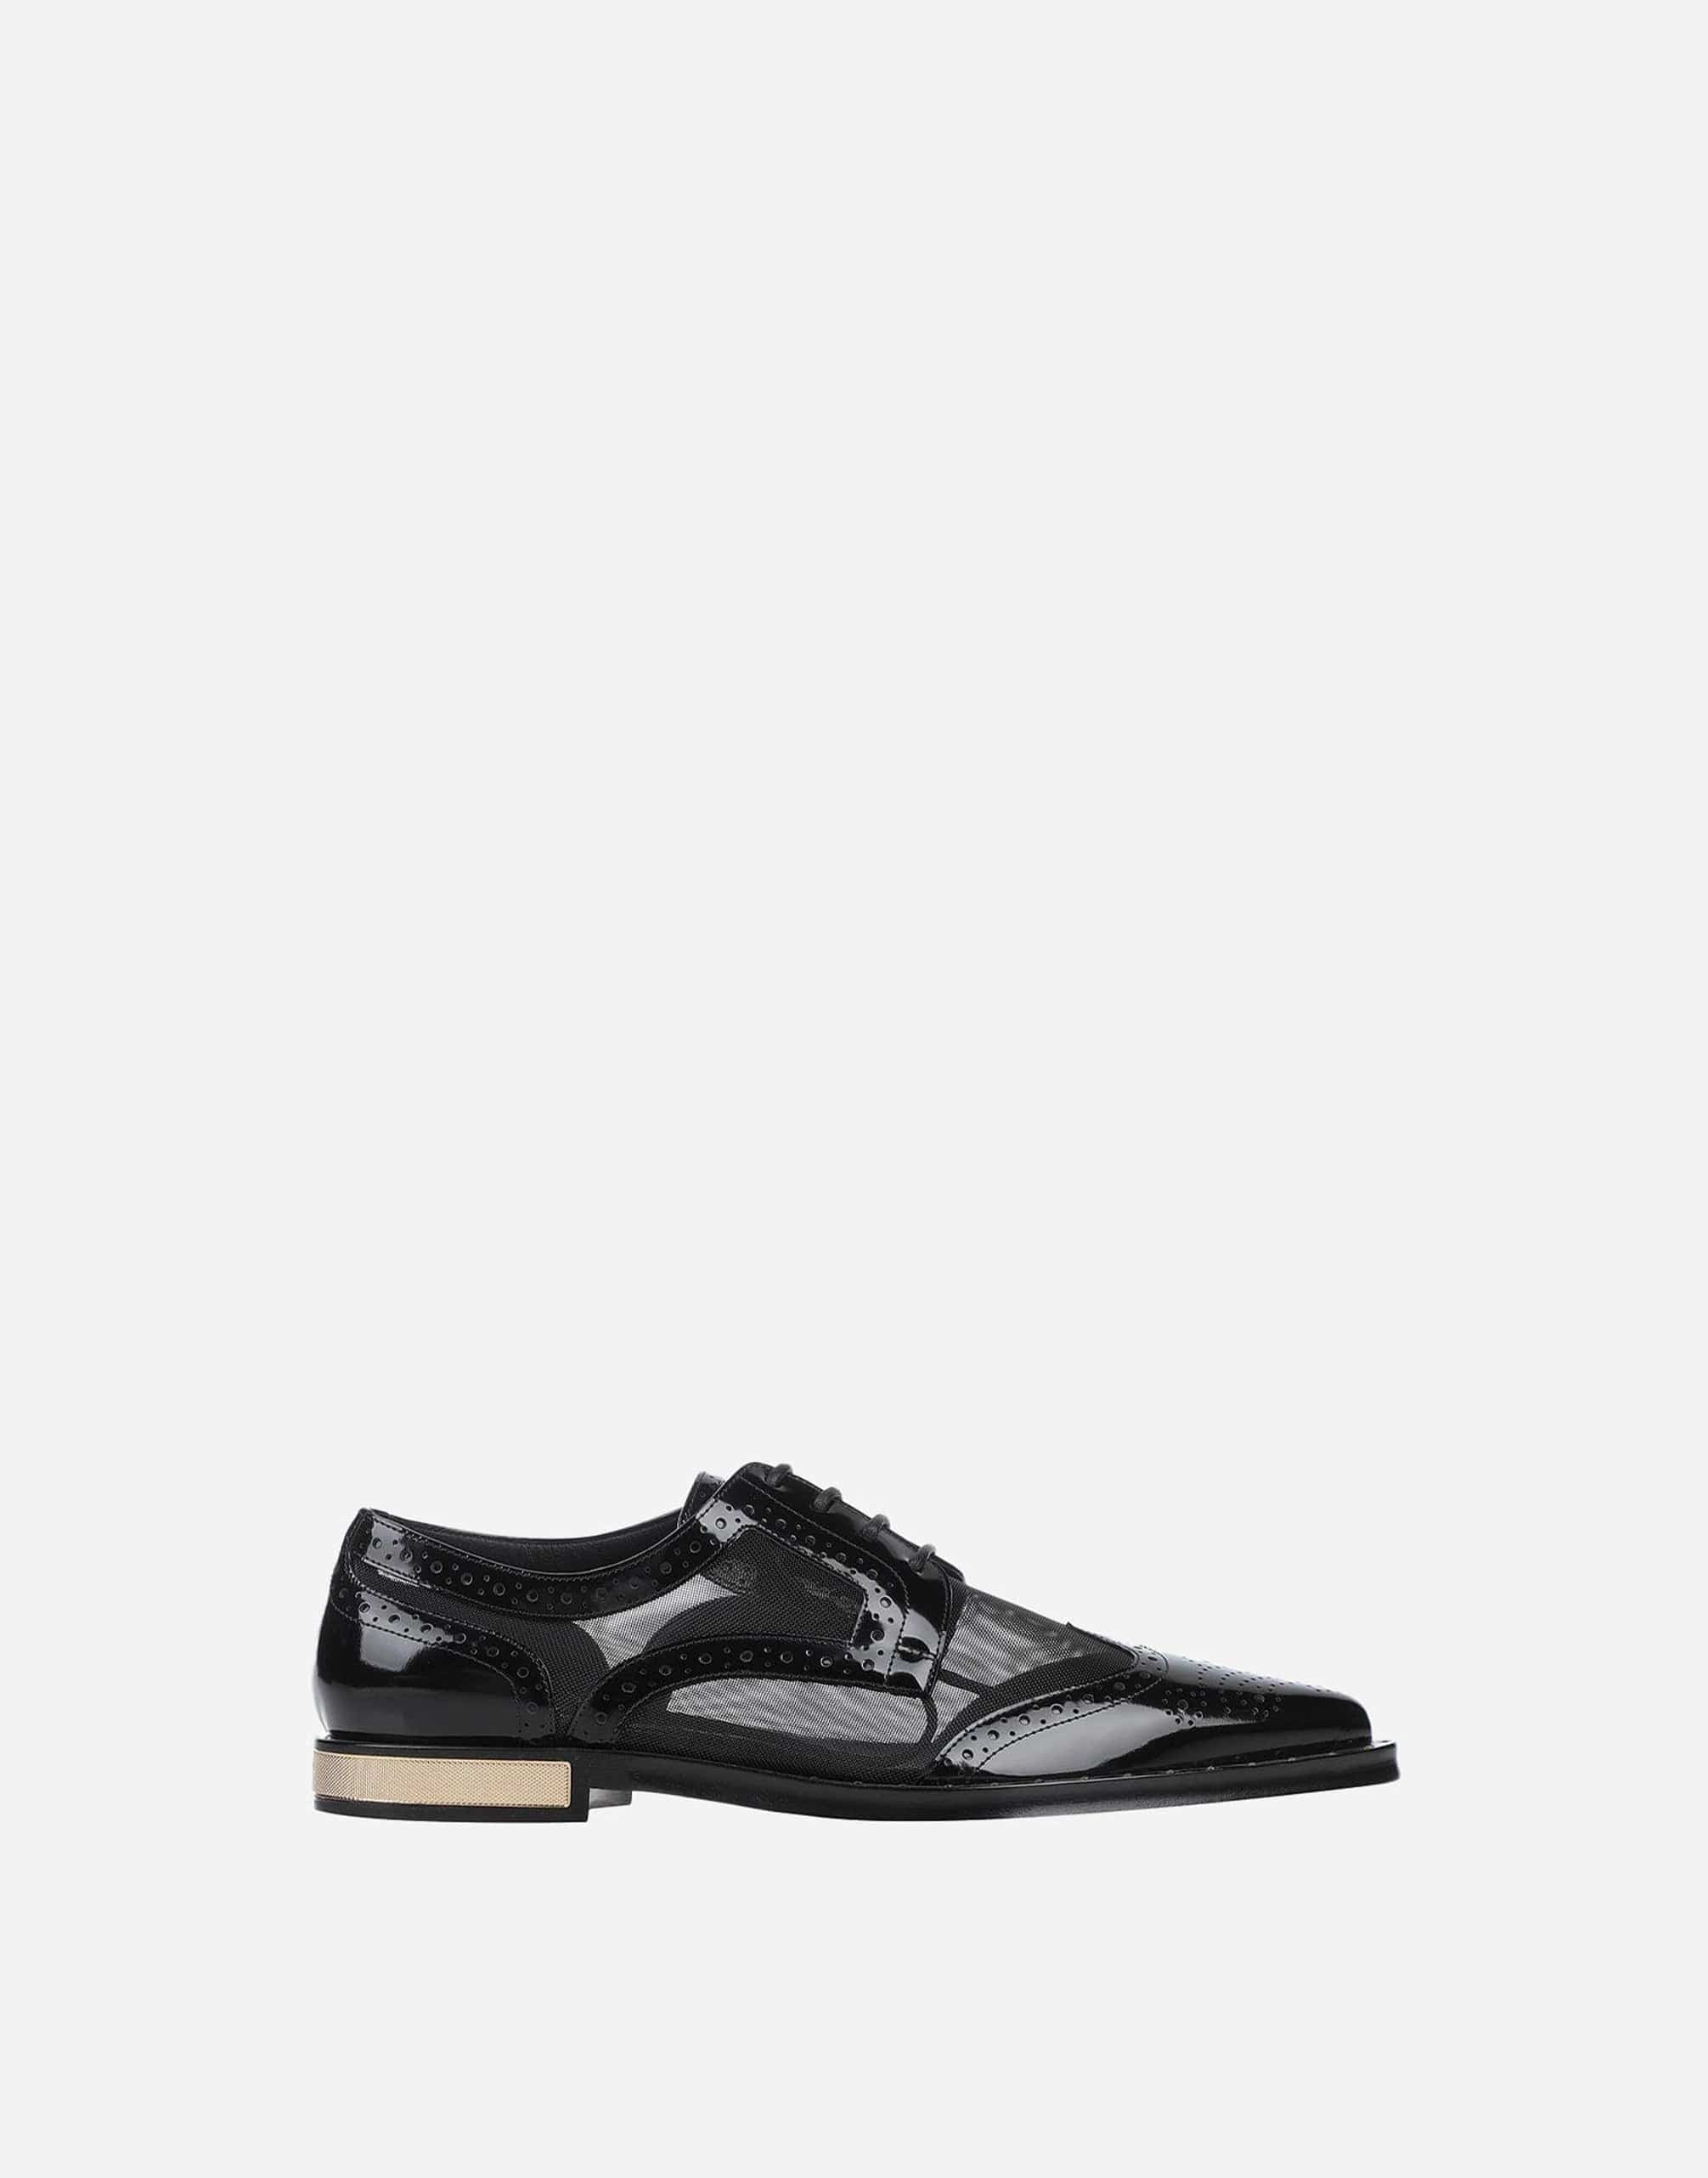 Dolce & Gabbana Leather Brogue Lace-Up Shoes